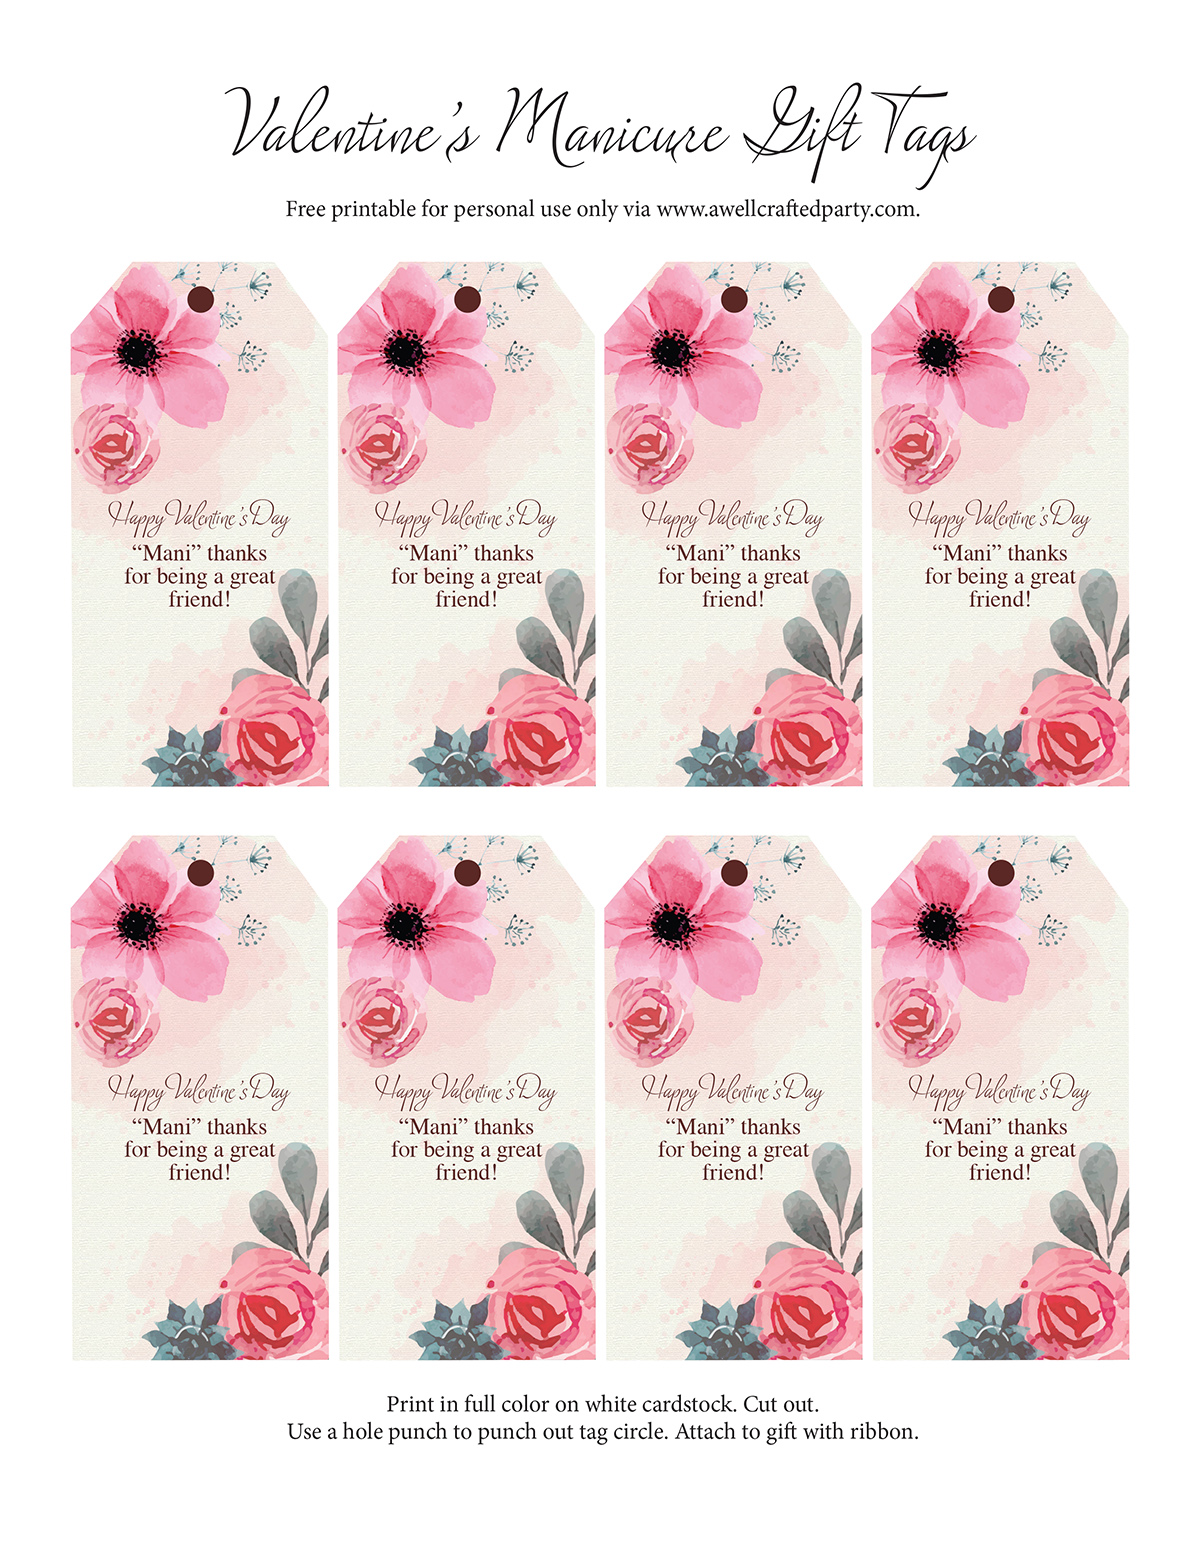 Free Valentine's Day Gift Tags - "Mani" Thanks! A Well Crafted Party